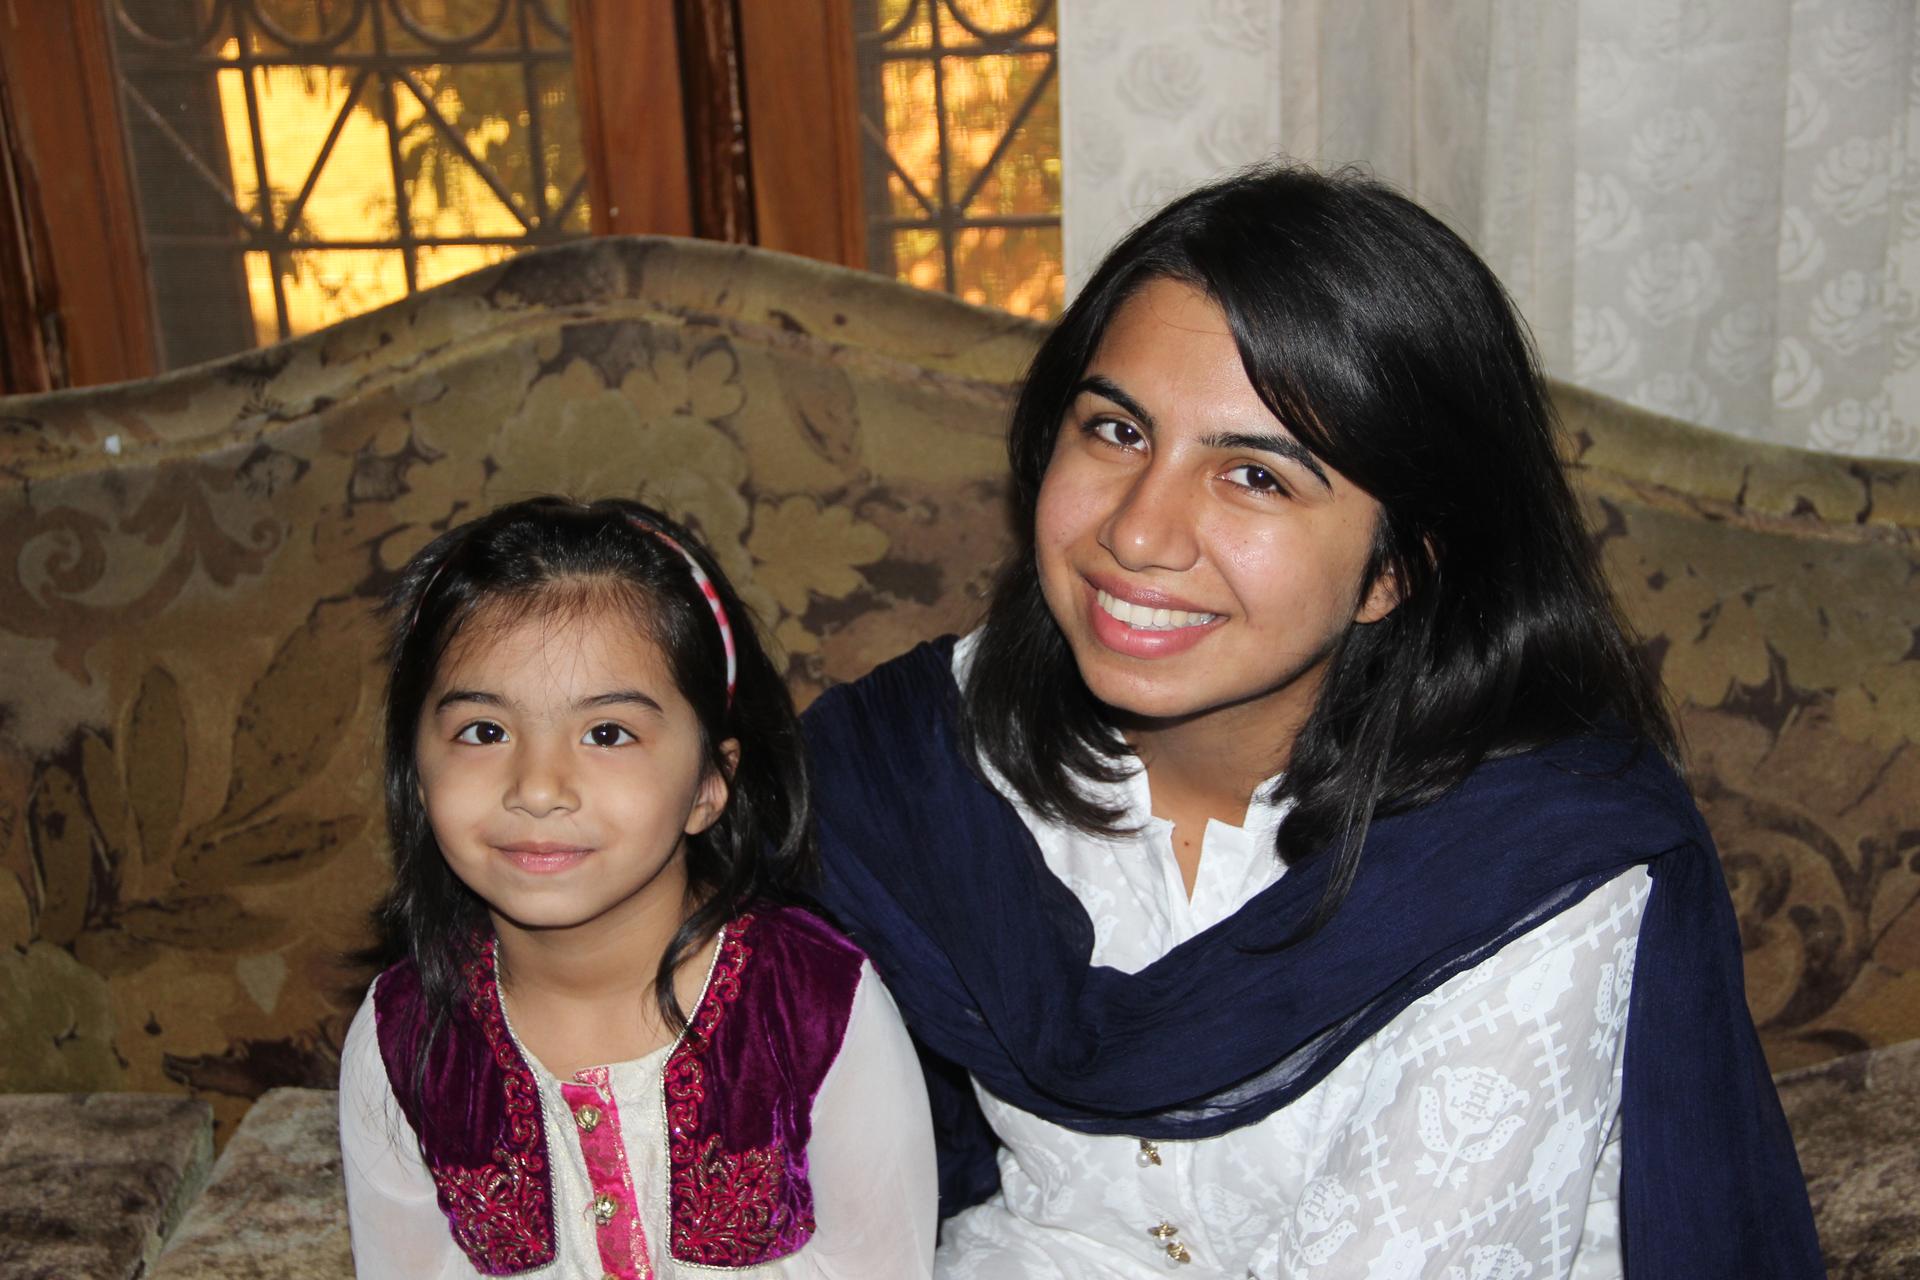 Umaima Awan sits with her mother, Um-E Salma, at the family’s house in Jauharabad, Pakistan.